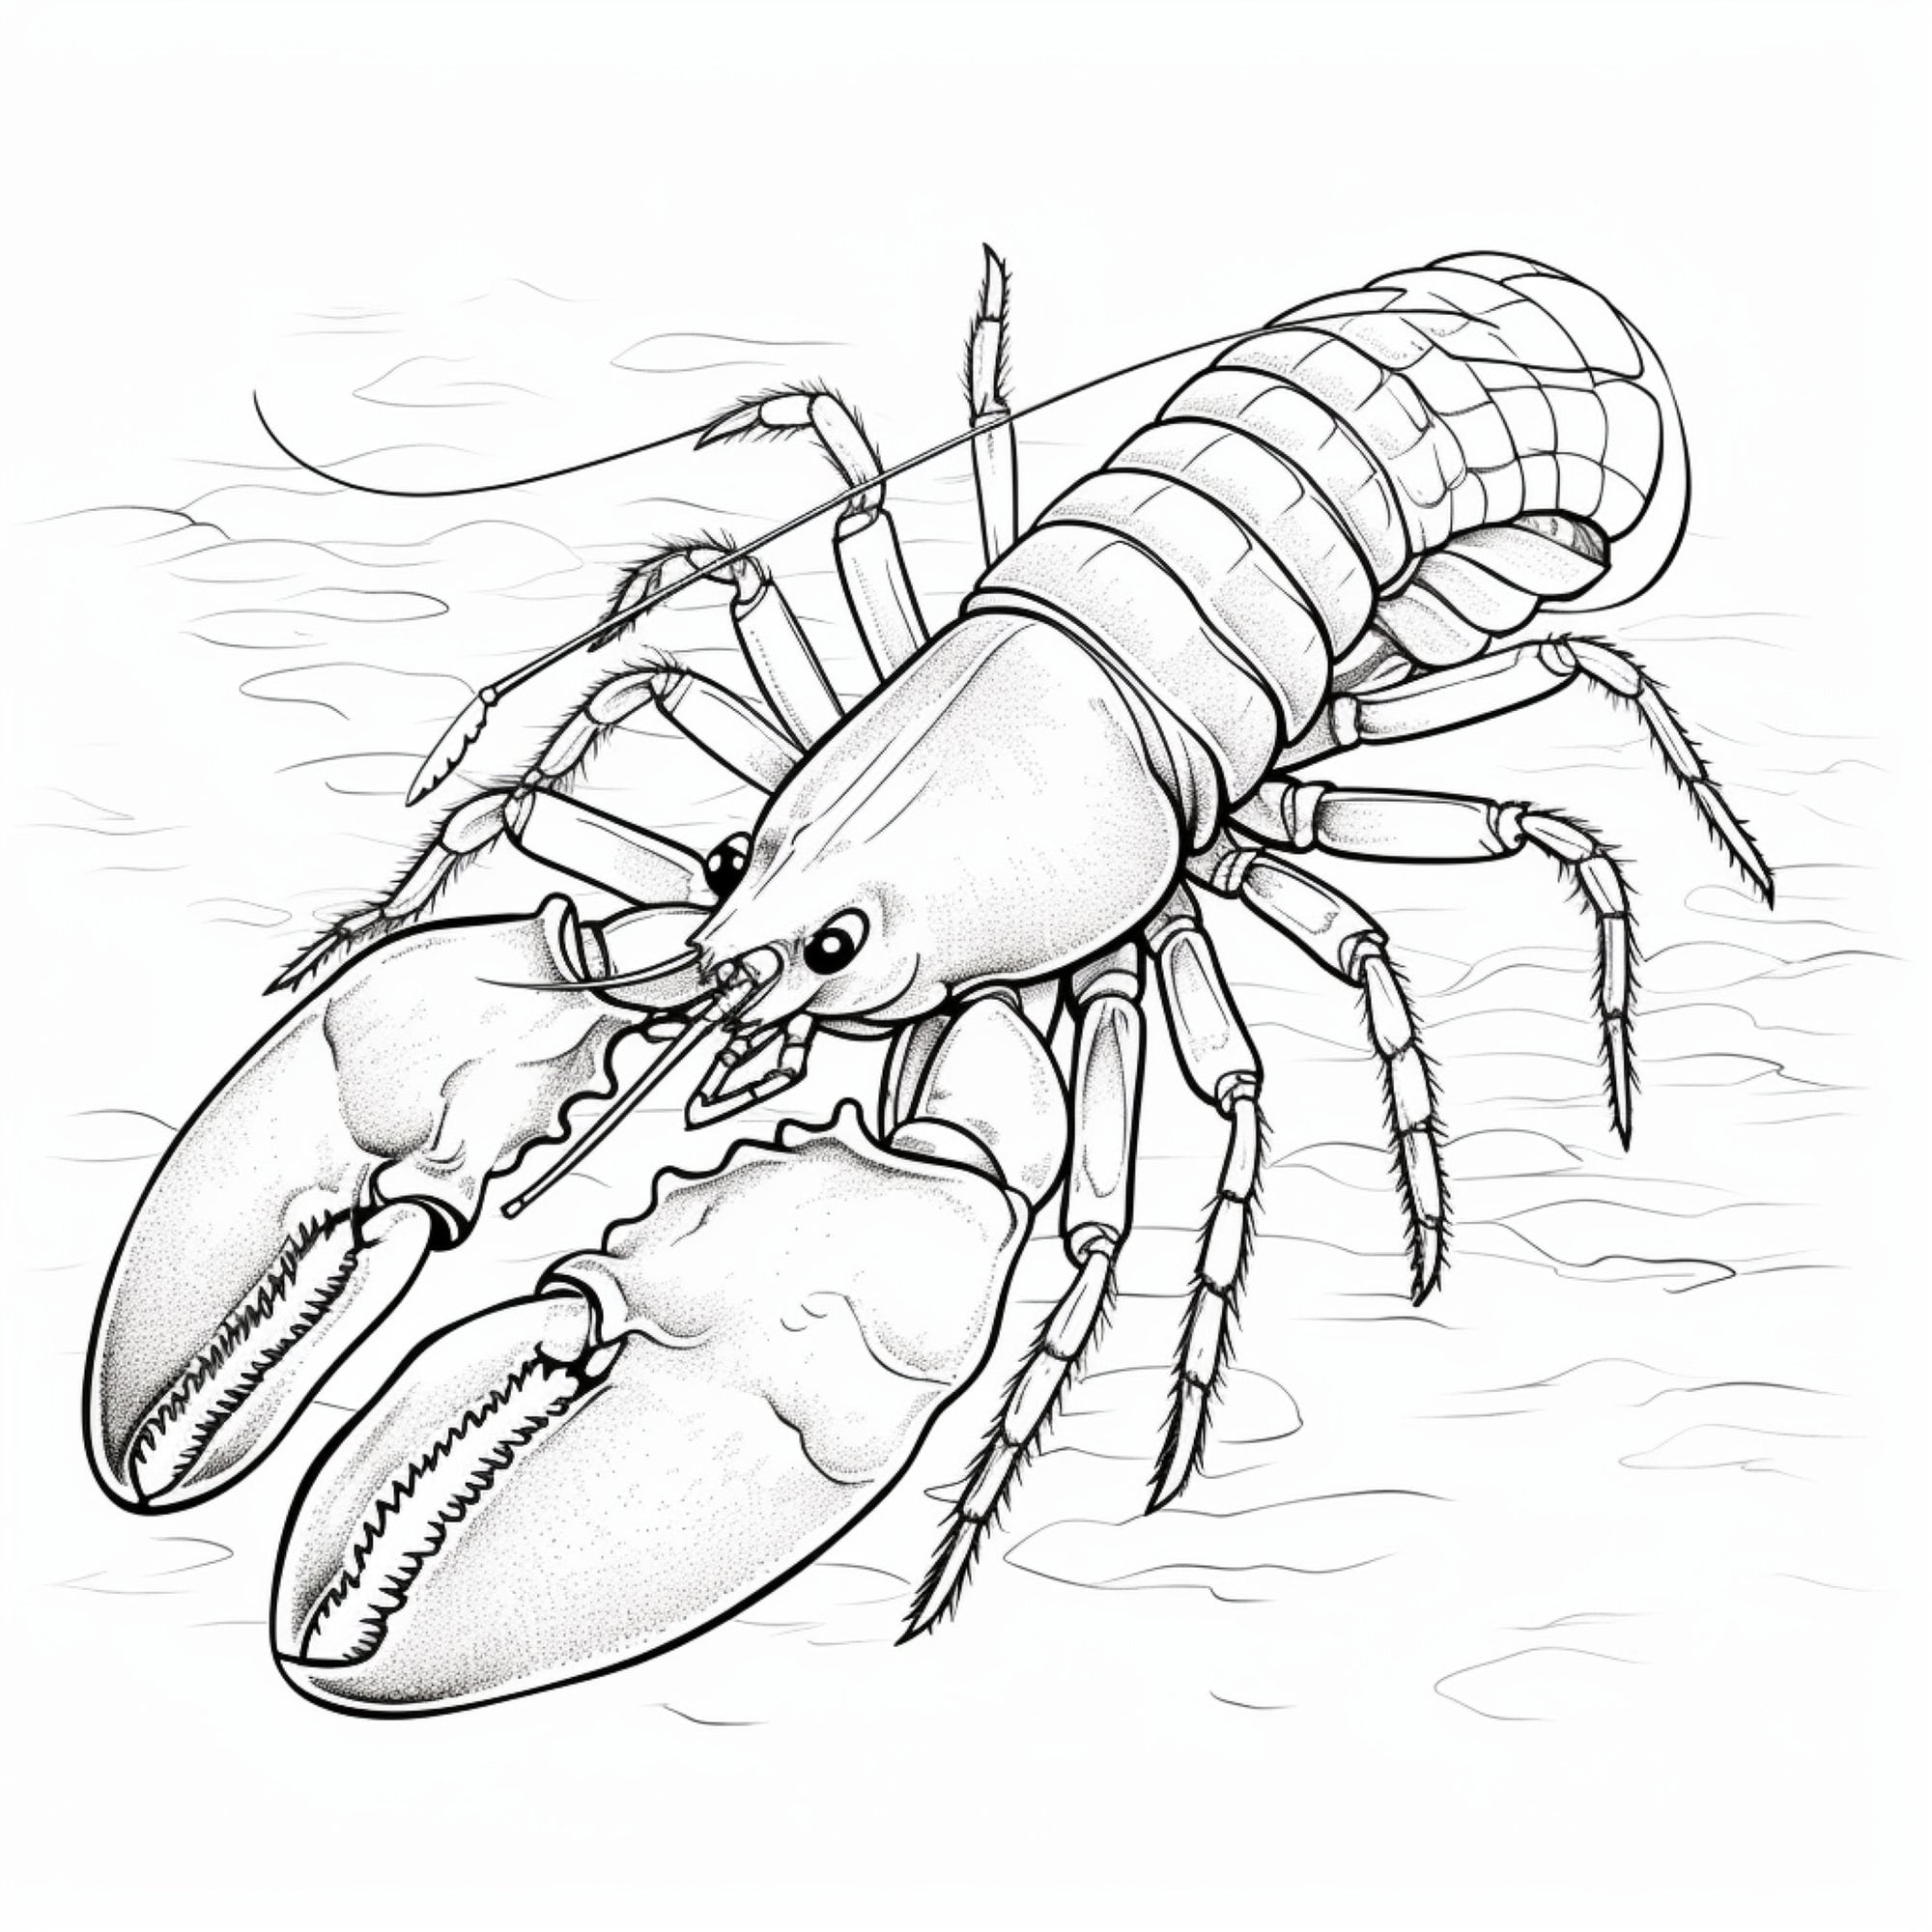 Ocean creatures coloring pages